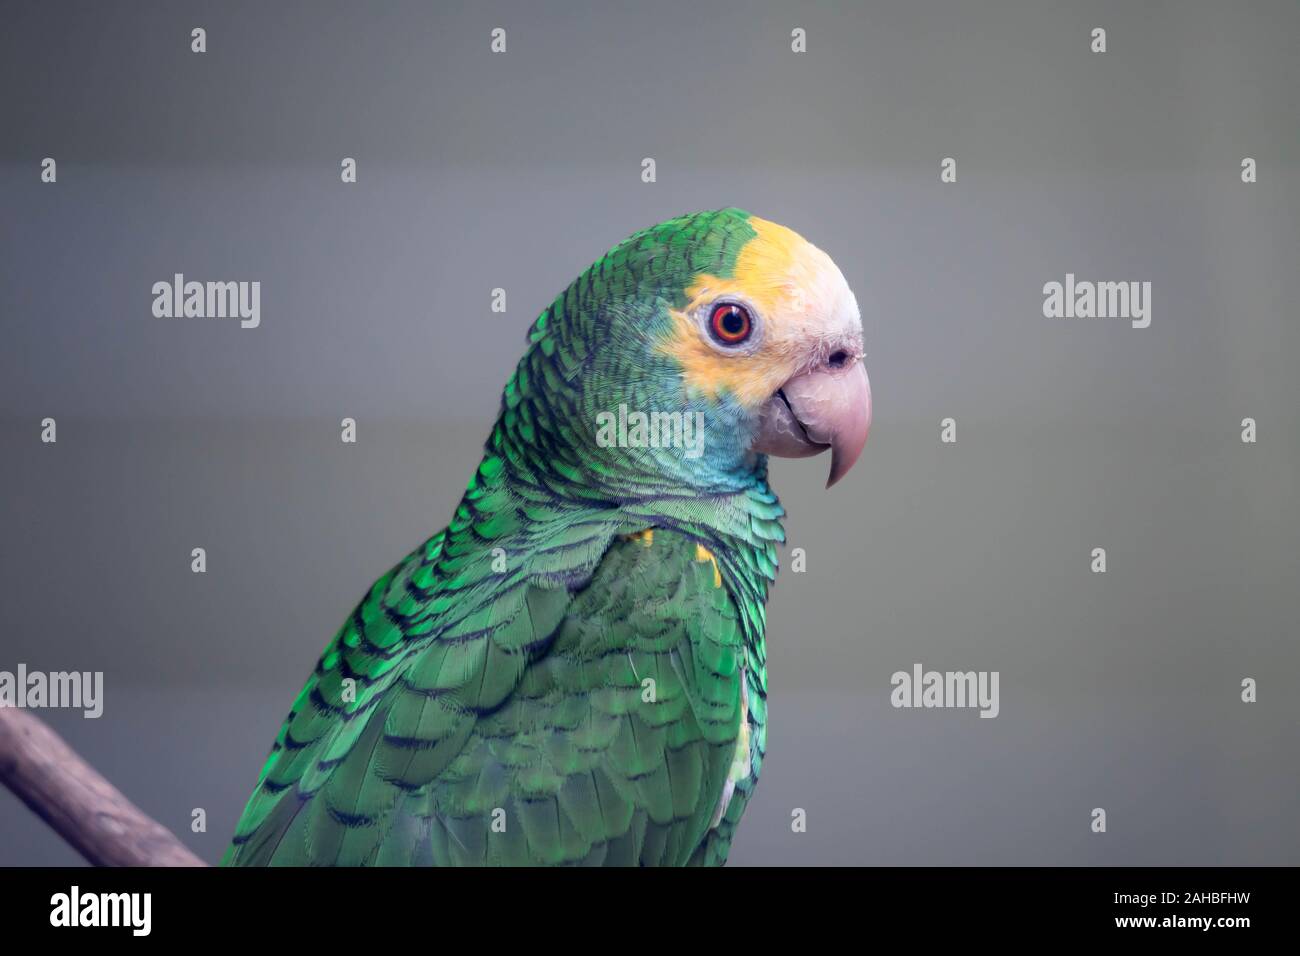 A Yellow-headed amazon close up. A close up view of the head and shoulders of a lovely yellow-headed amazon parrot. Stock Photo